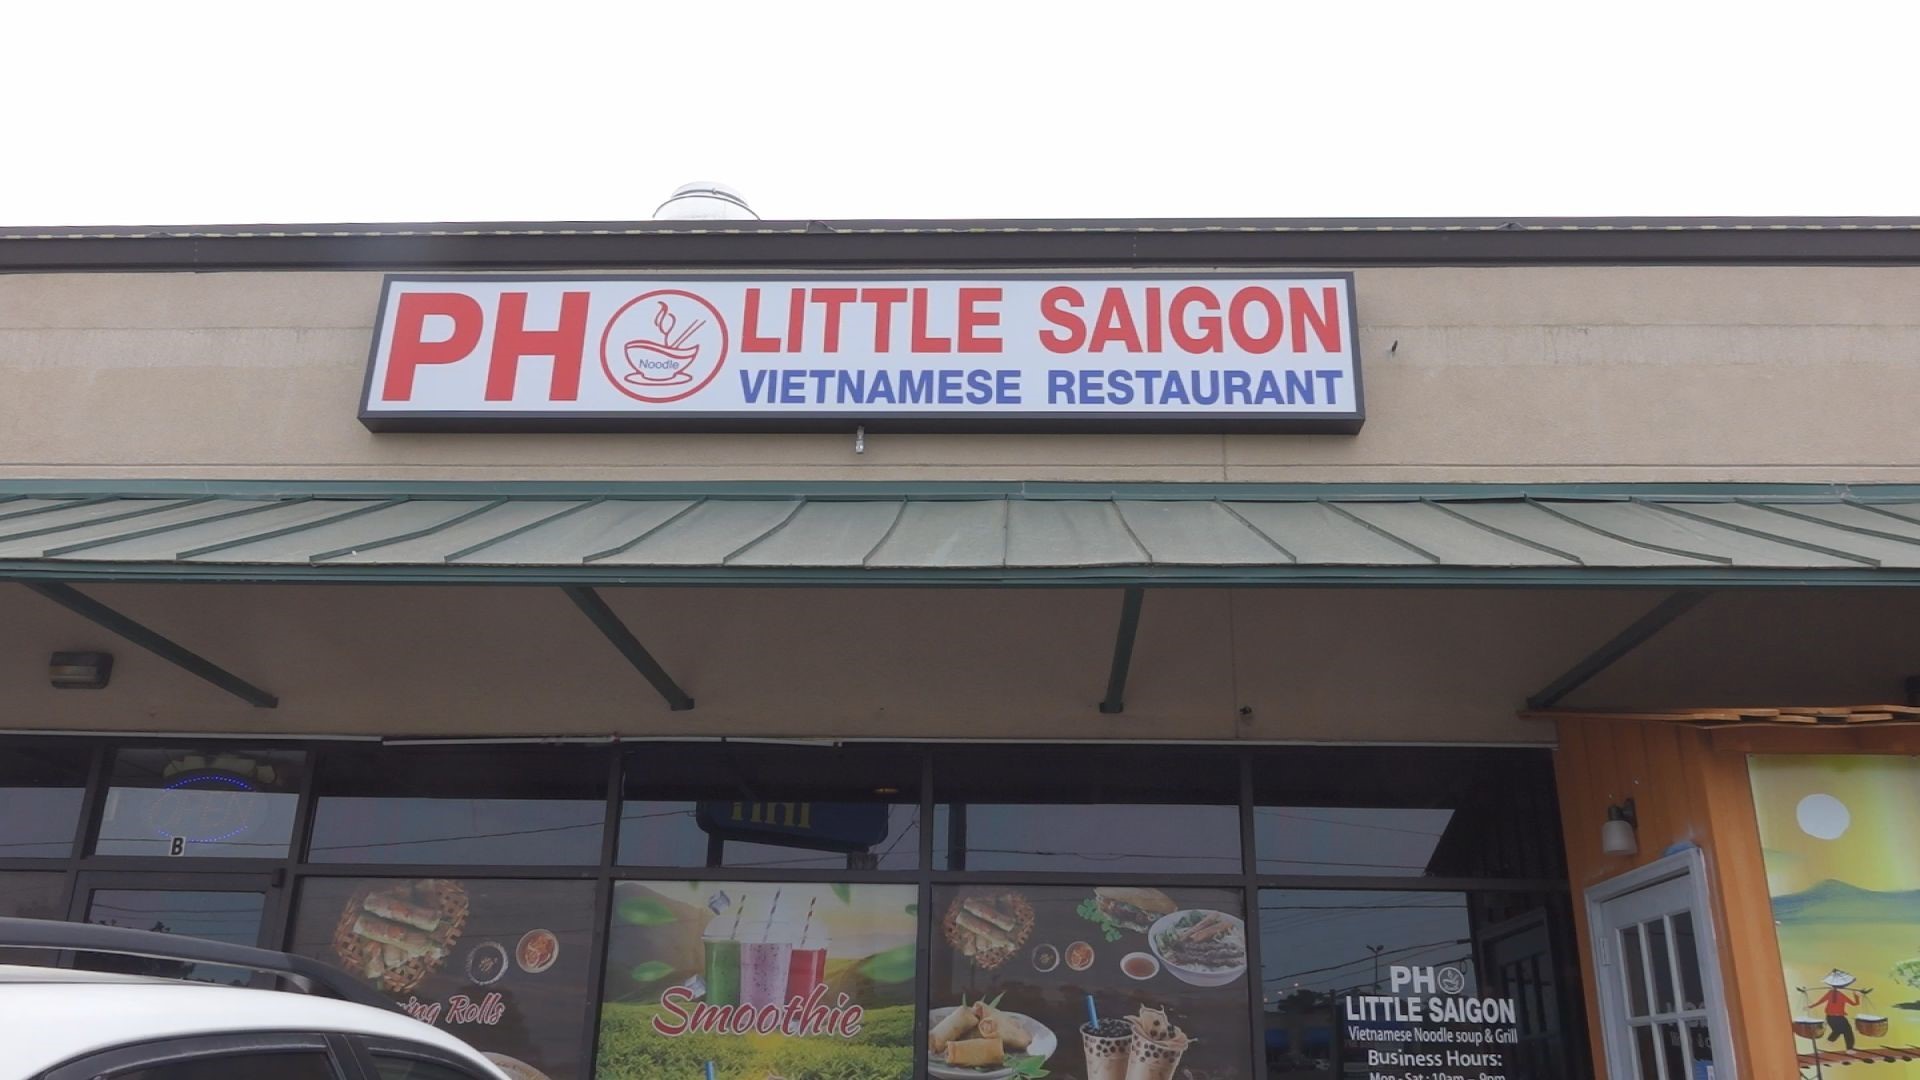 Pho Little Saigon Vietnamese Noodle Soup & Grill has egg rolls, spring rolls, fried rice and, of course, pho